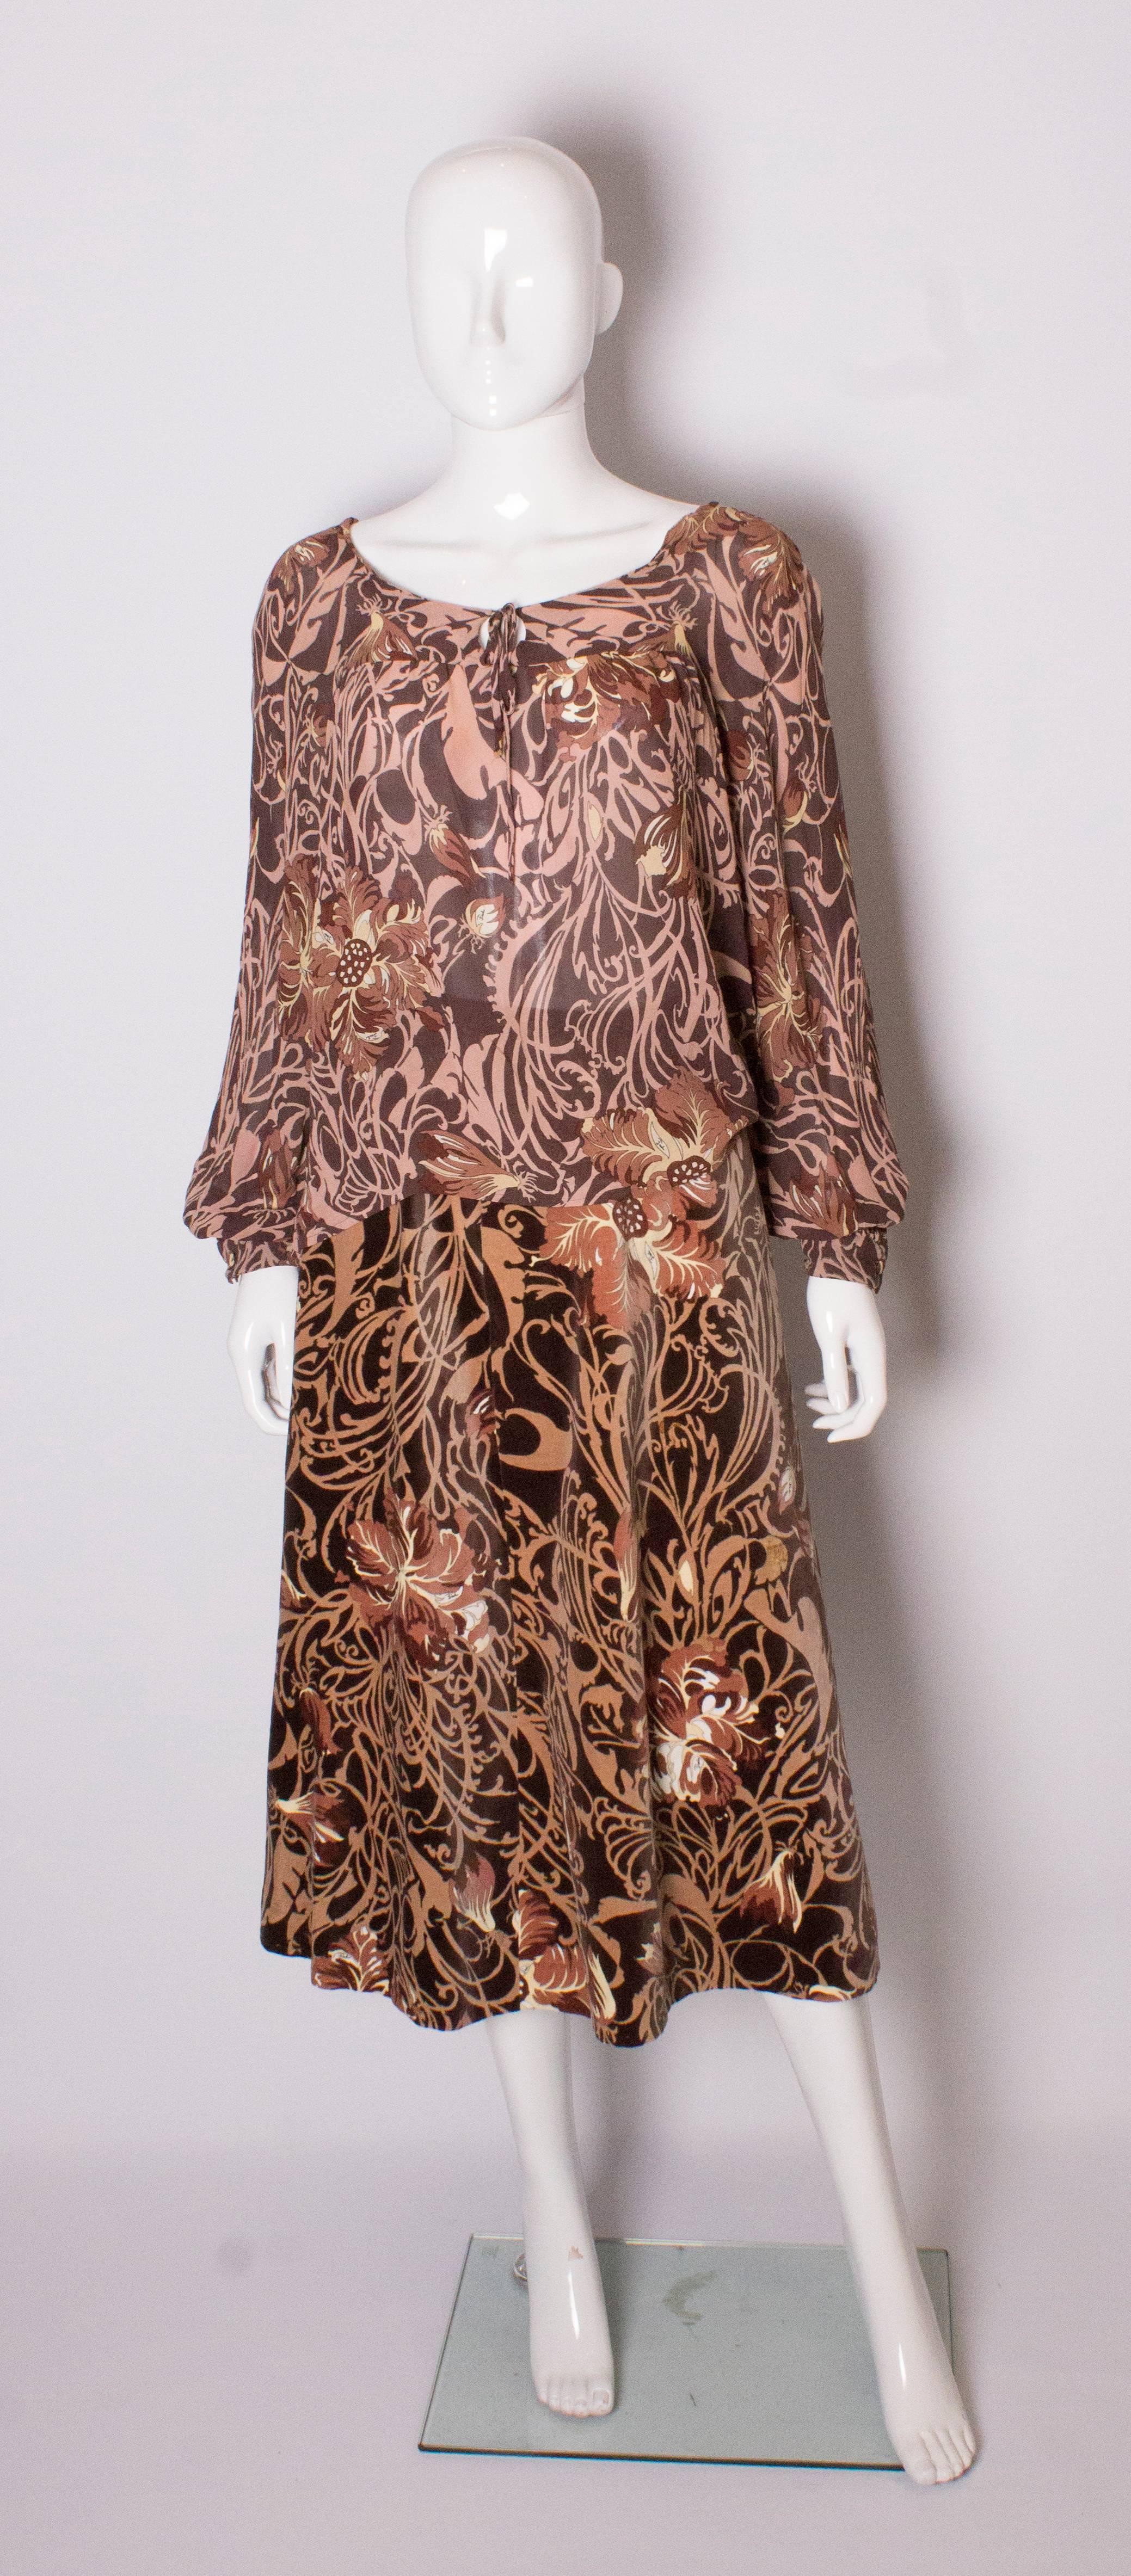 A great print for Fall from Pucci. This outfit has a velvet skirt ( fully lined) with a size zip, and a silk blouse in the same print. The blouse has a tie neck and single button cuffs.
Skirt, waist 28'', length 33',  blouse bust 39'', length 24''